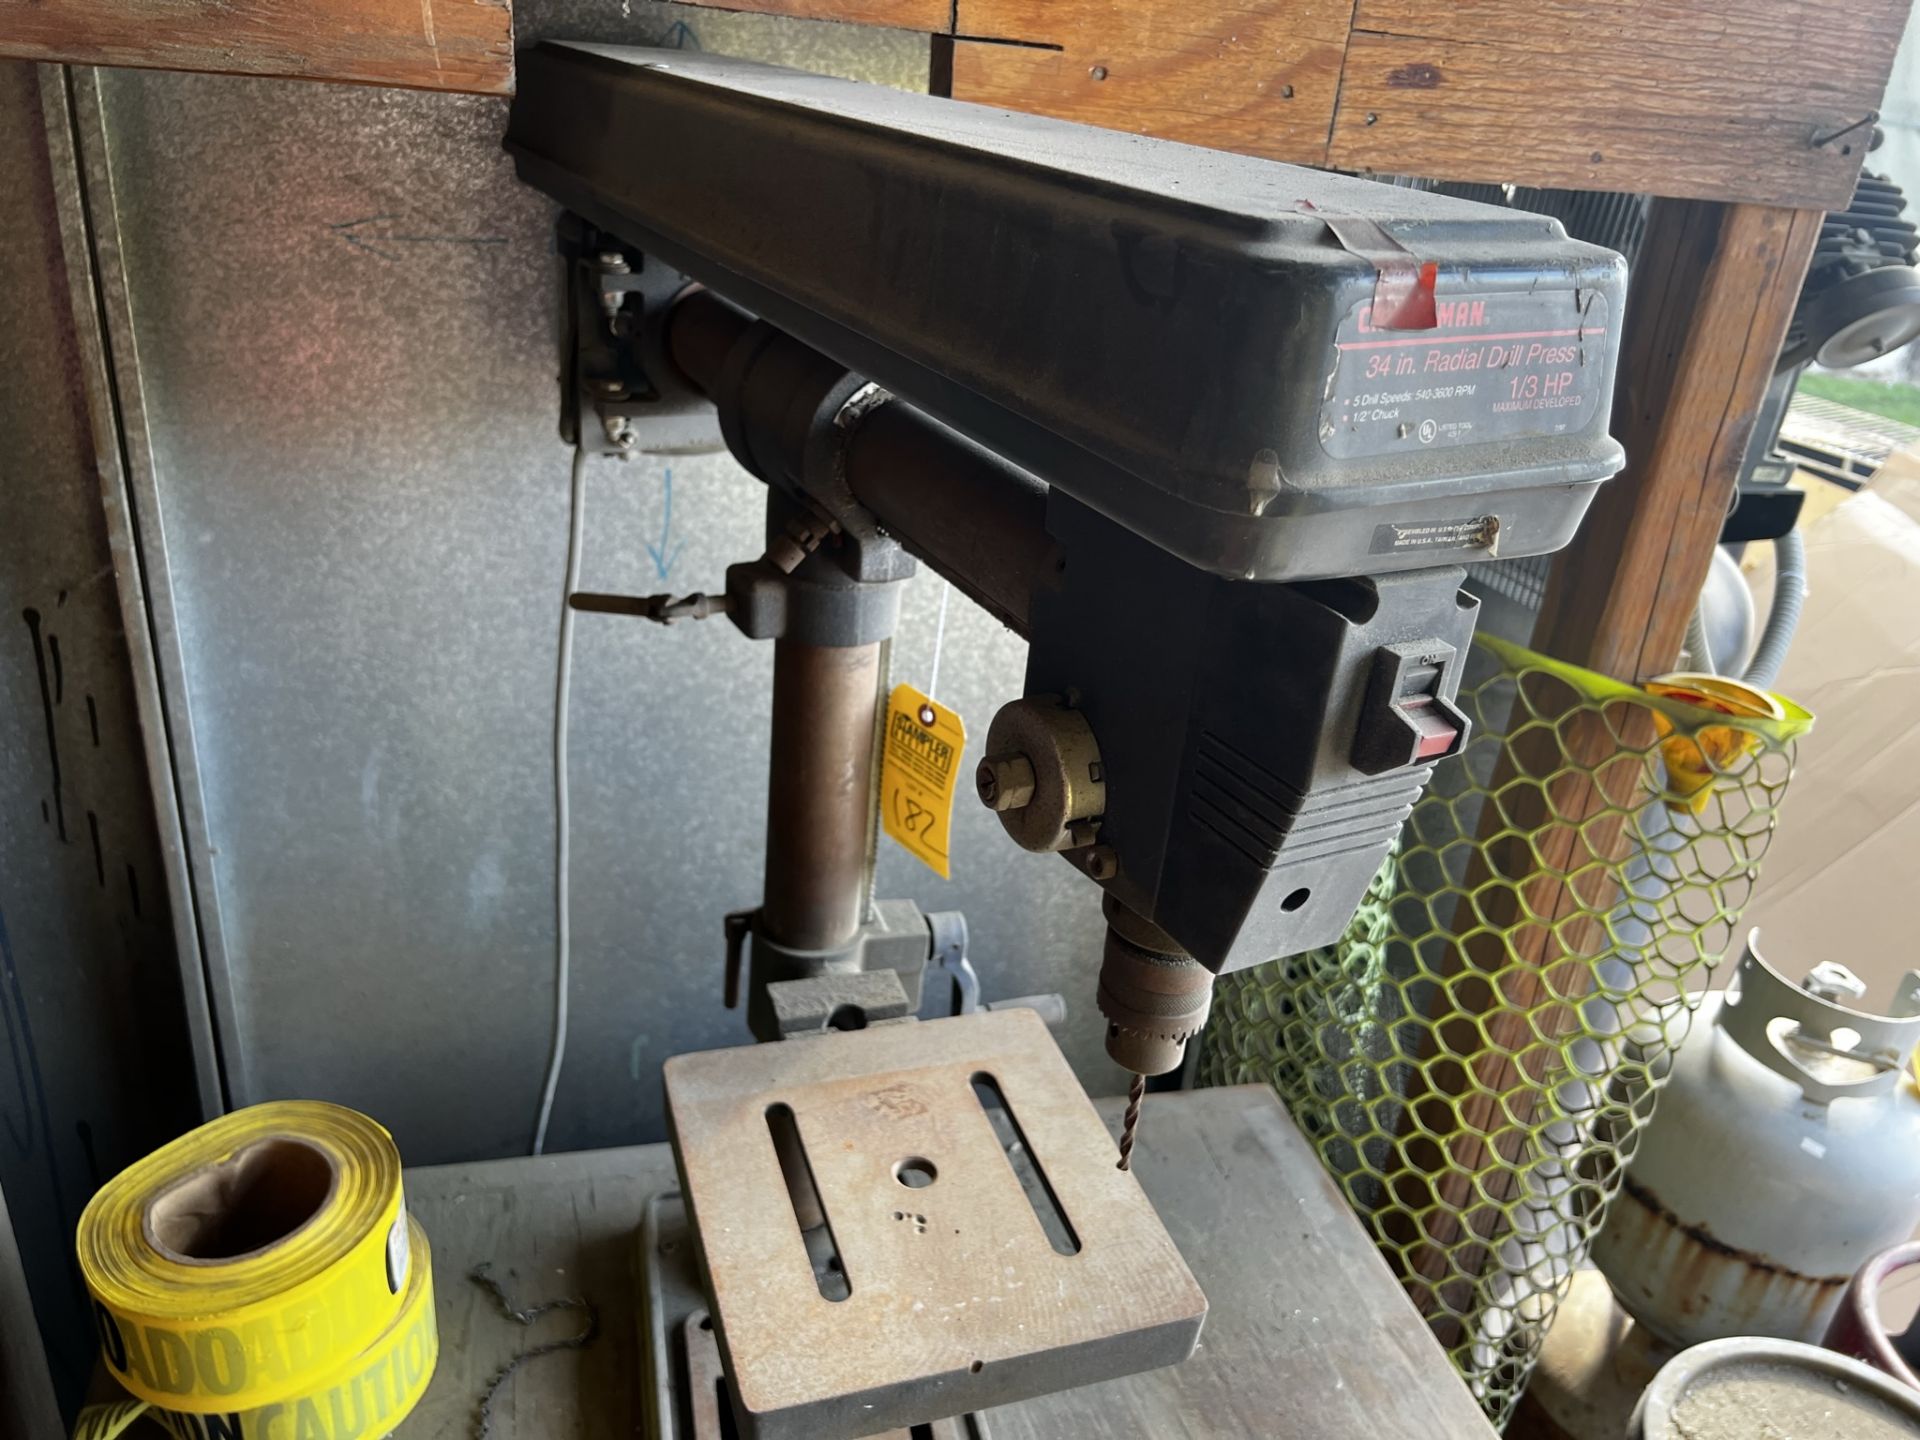 CRAFTSMAN RADIAL DRILL PRESS ON STAND - 34'' (LOCATED IN WEST PALM BEACH, FL) - Image 4 of 4